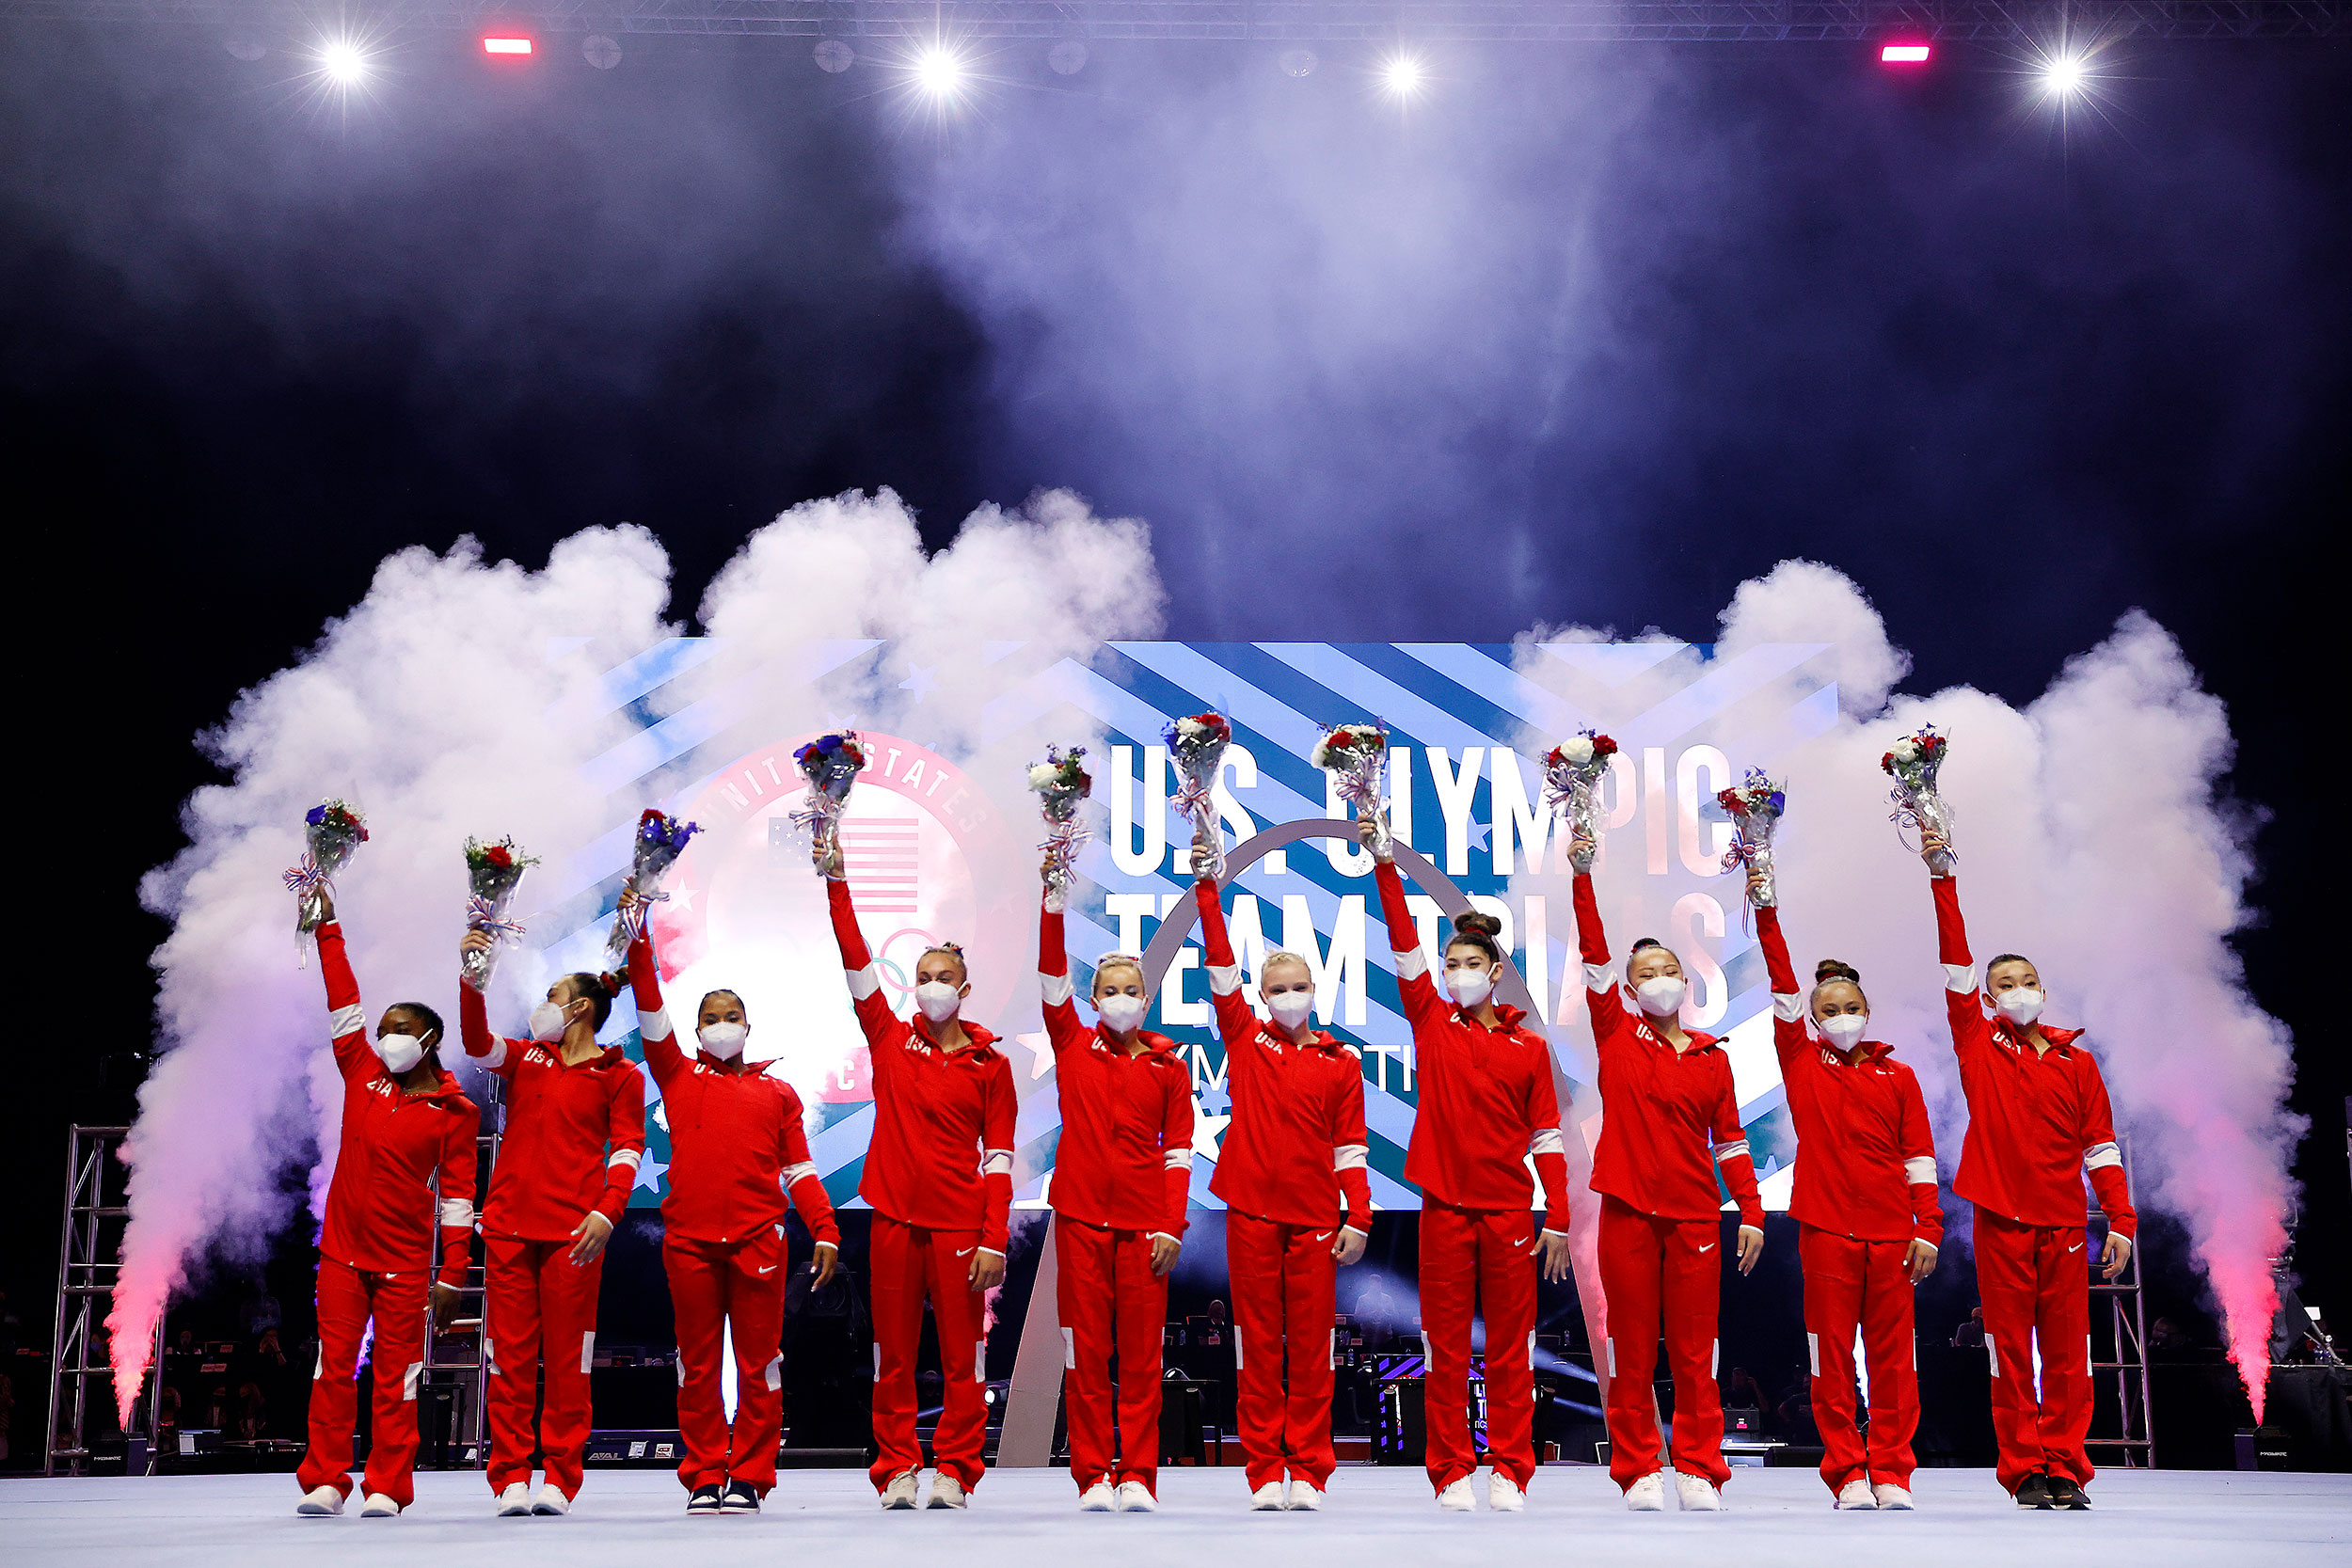 Members of the US women's gymnastics team pose for a photo following Olympic trials in St. Louis, Missouri, on June 27.